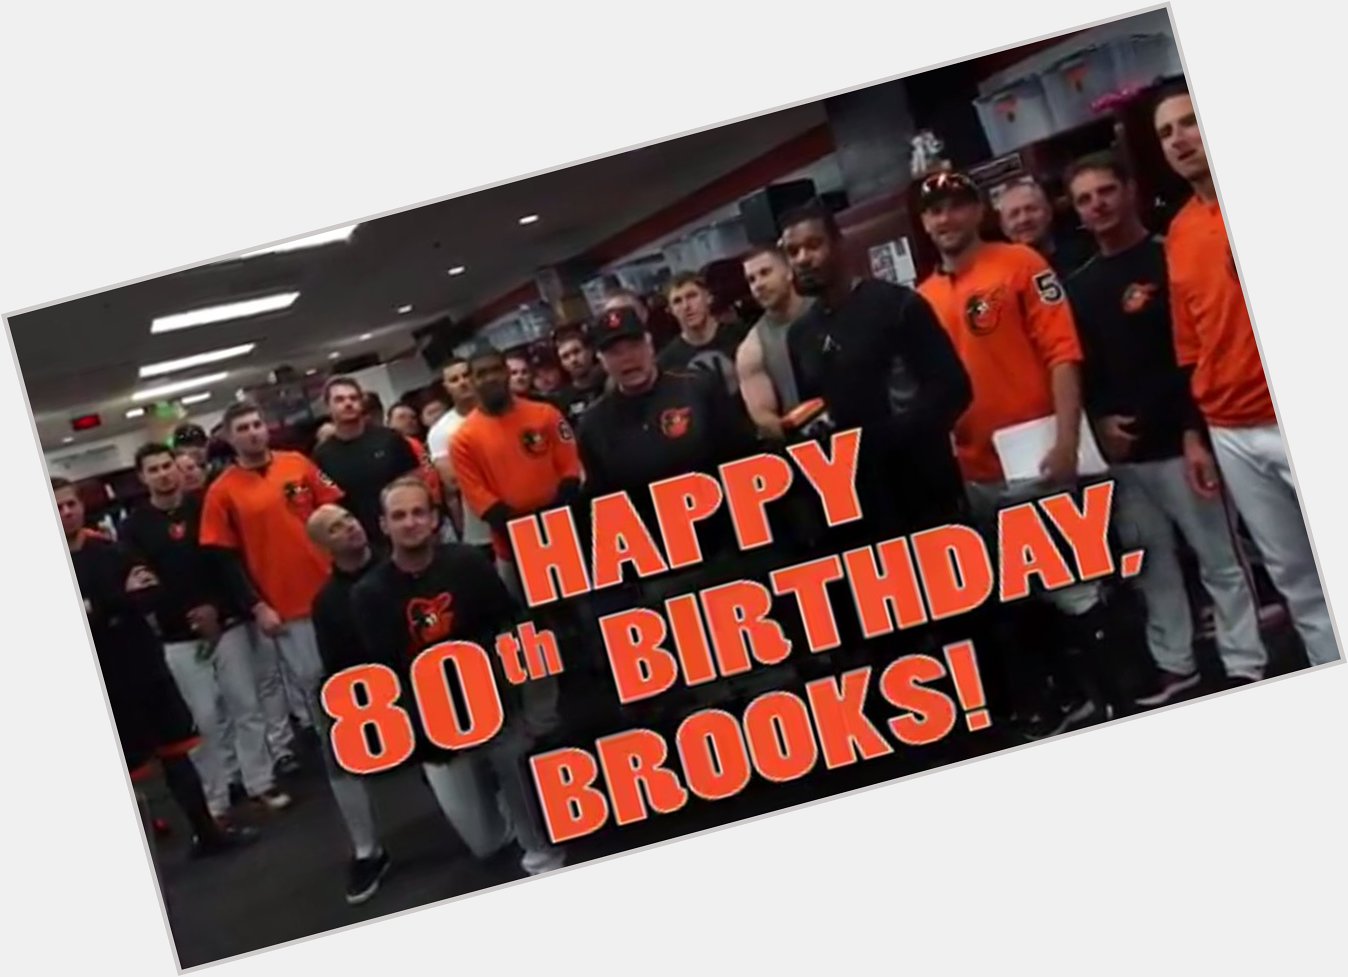 WATCH: Orioles wish icon Brooks Robinson \happy birthday\ with a video message
 